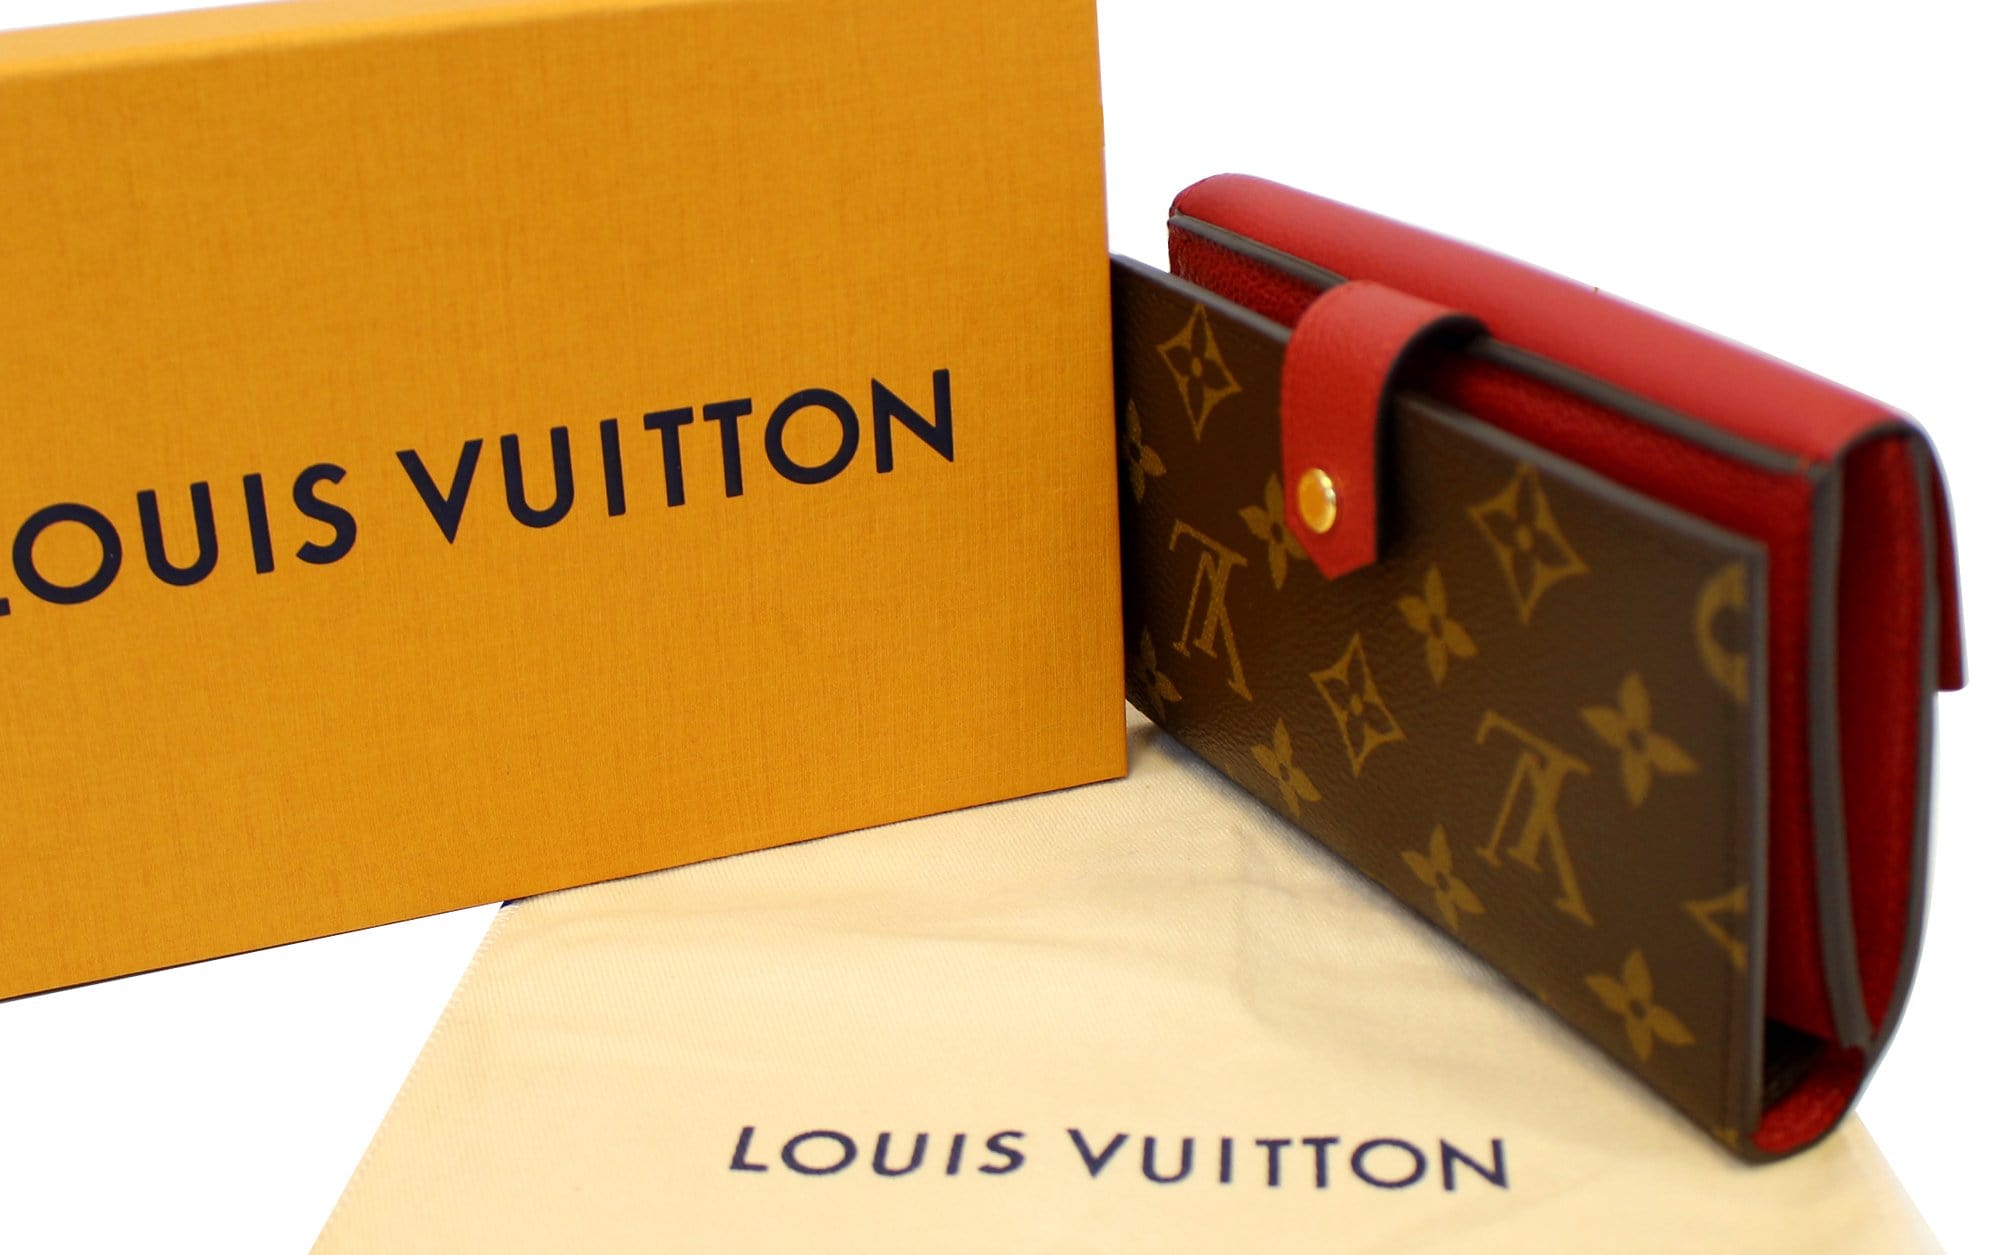 LULUX-The Luxury Hub - Louis Vuitton LV Women Pallas Compact Wallet In  Monogram Canvas With Colored Calf Leather  vuitton-lv-women-pallas-compact-wallet-in-monogram-canvas-with-colored-calf-leather/